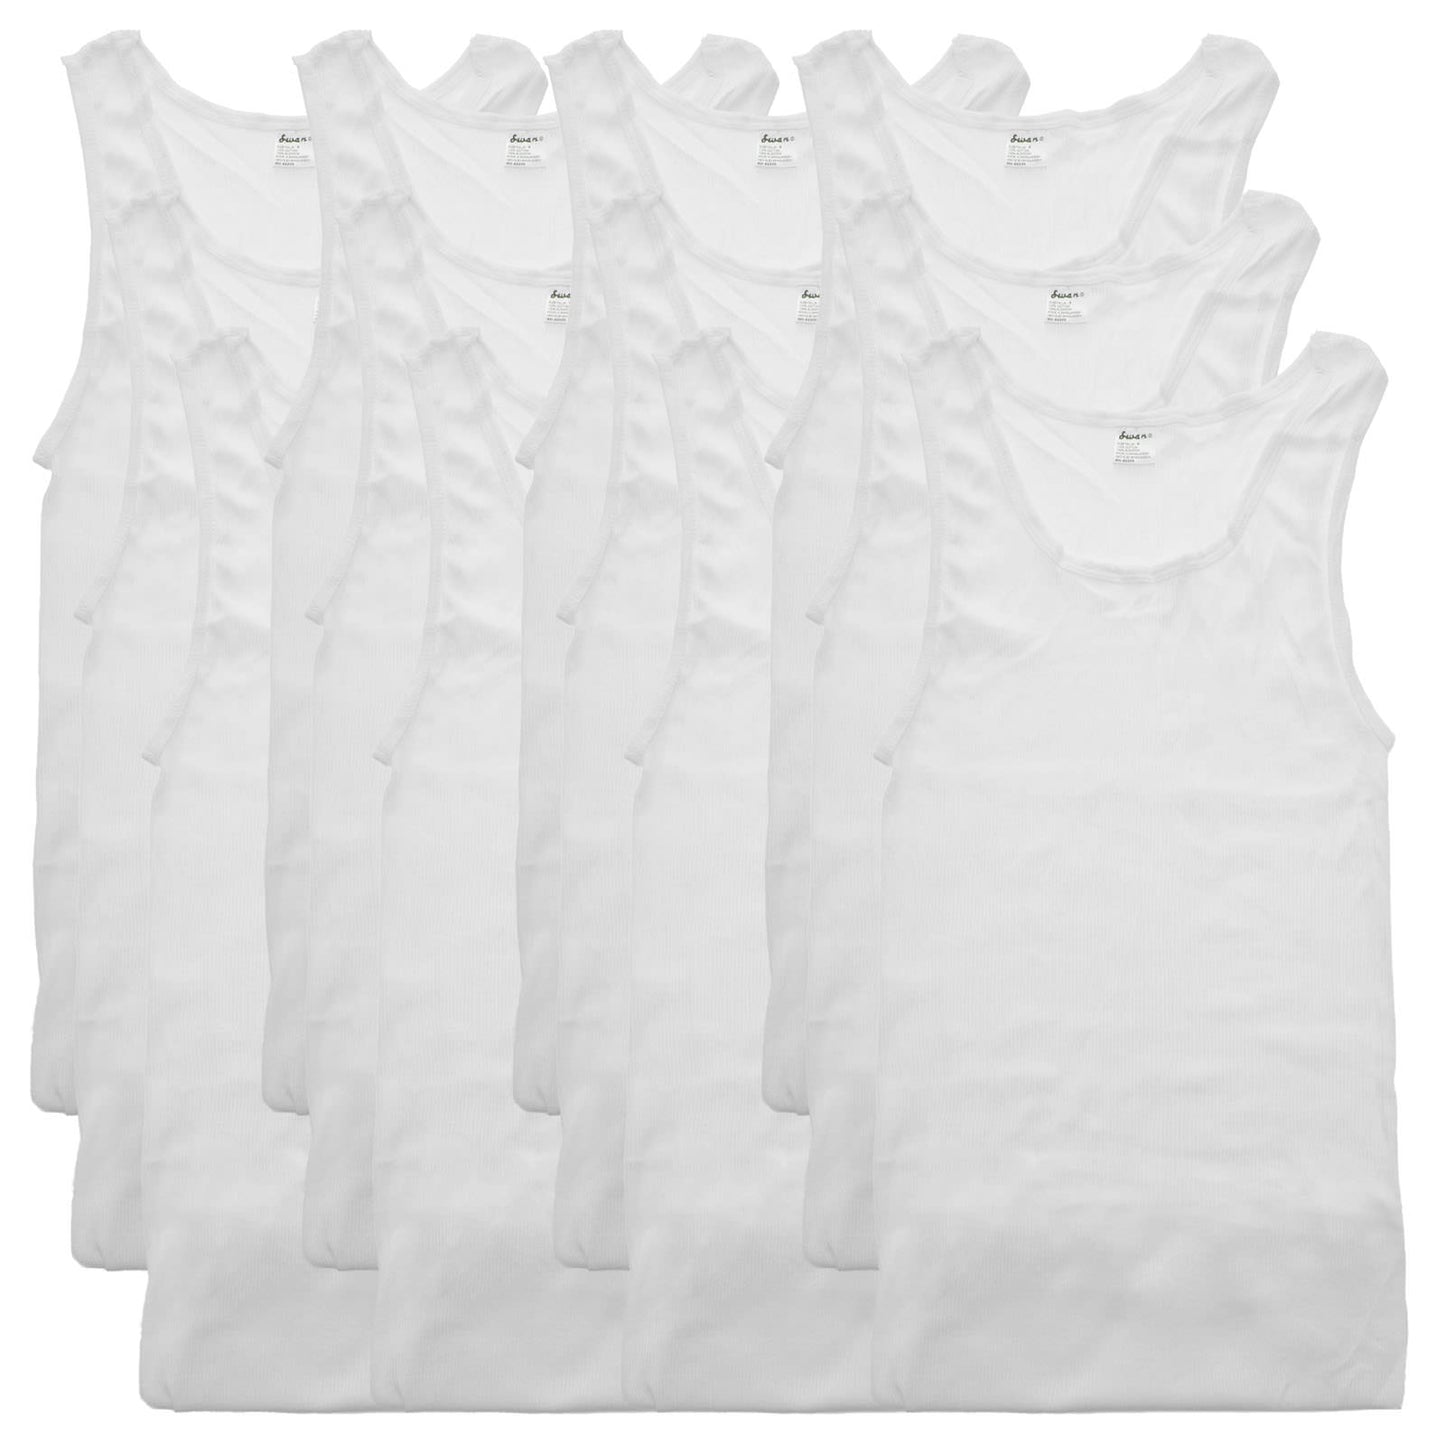 Swan Ribbed White A-Shirt (12-Pack), #3201